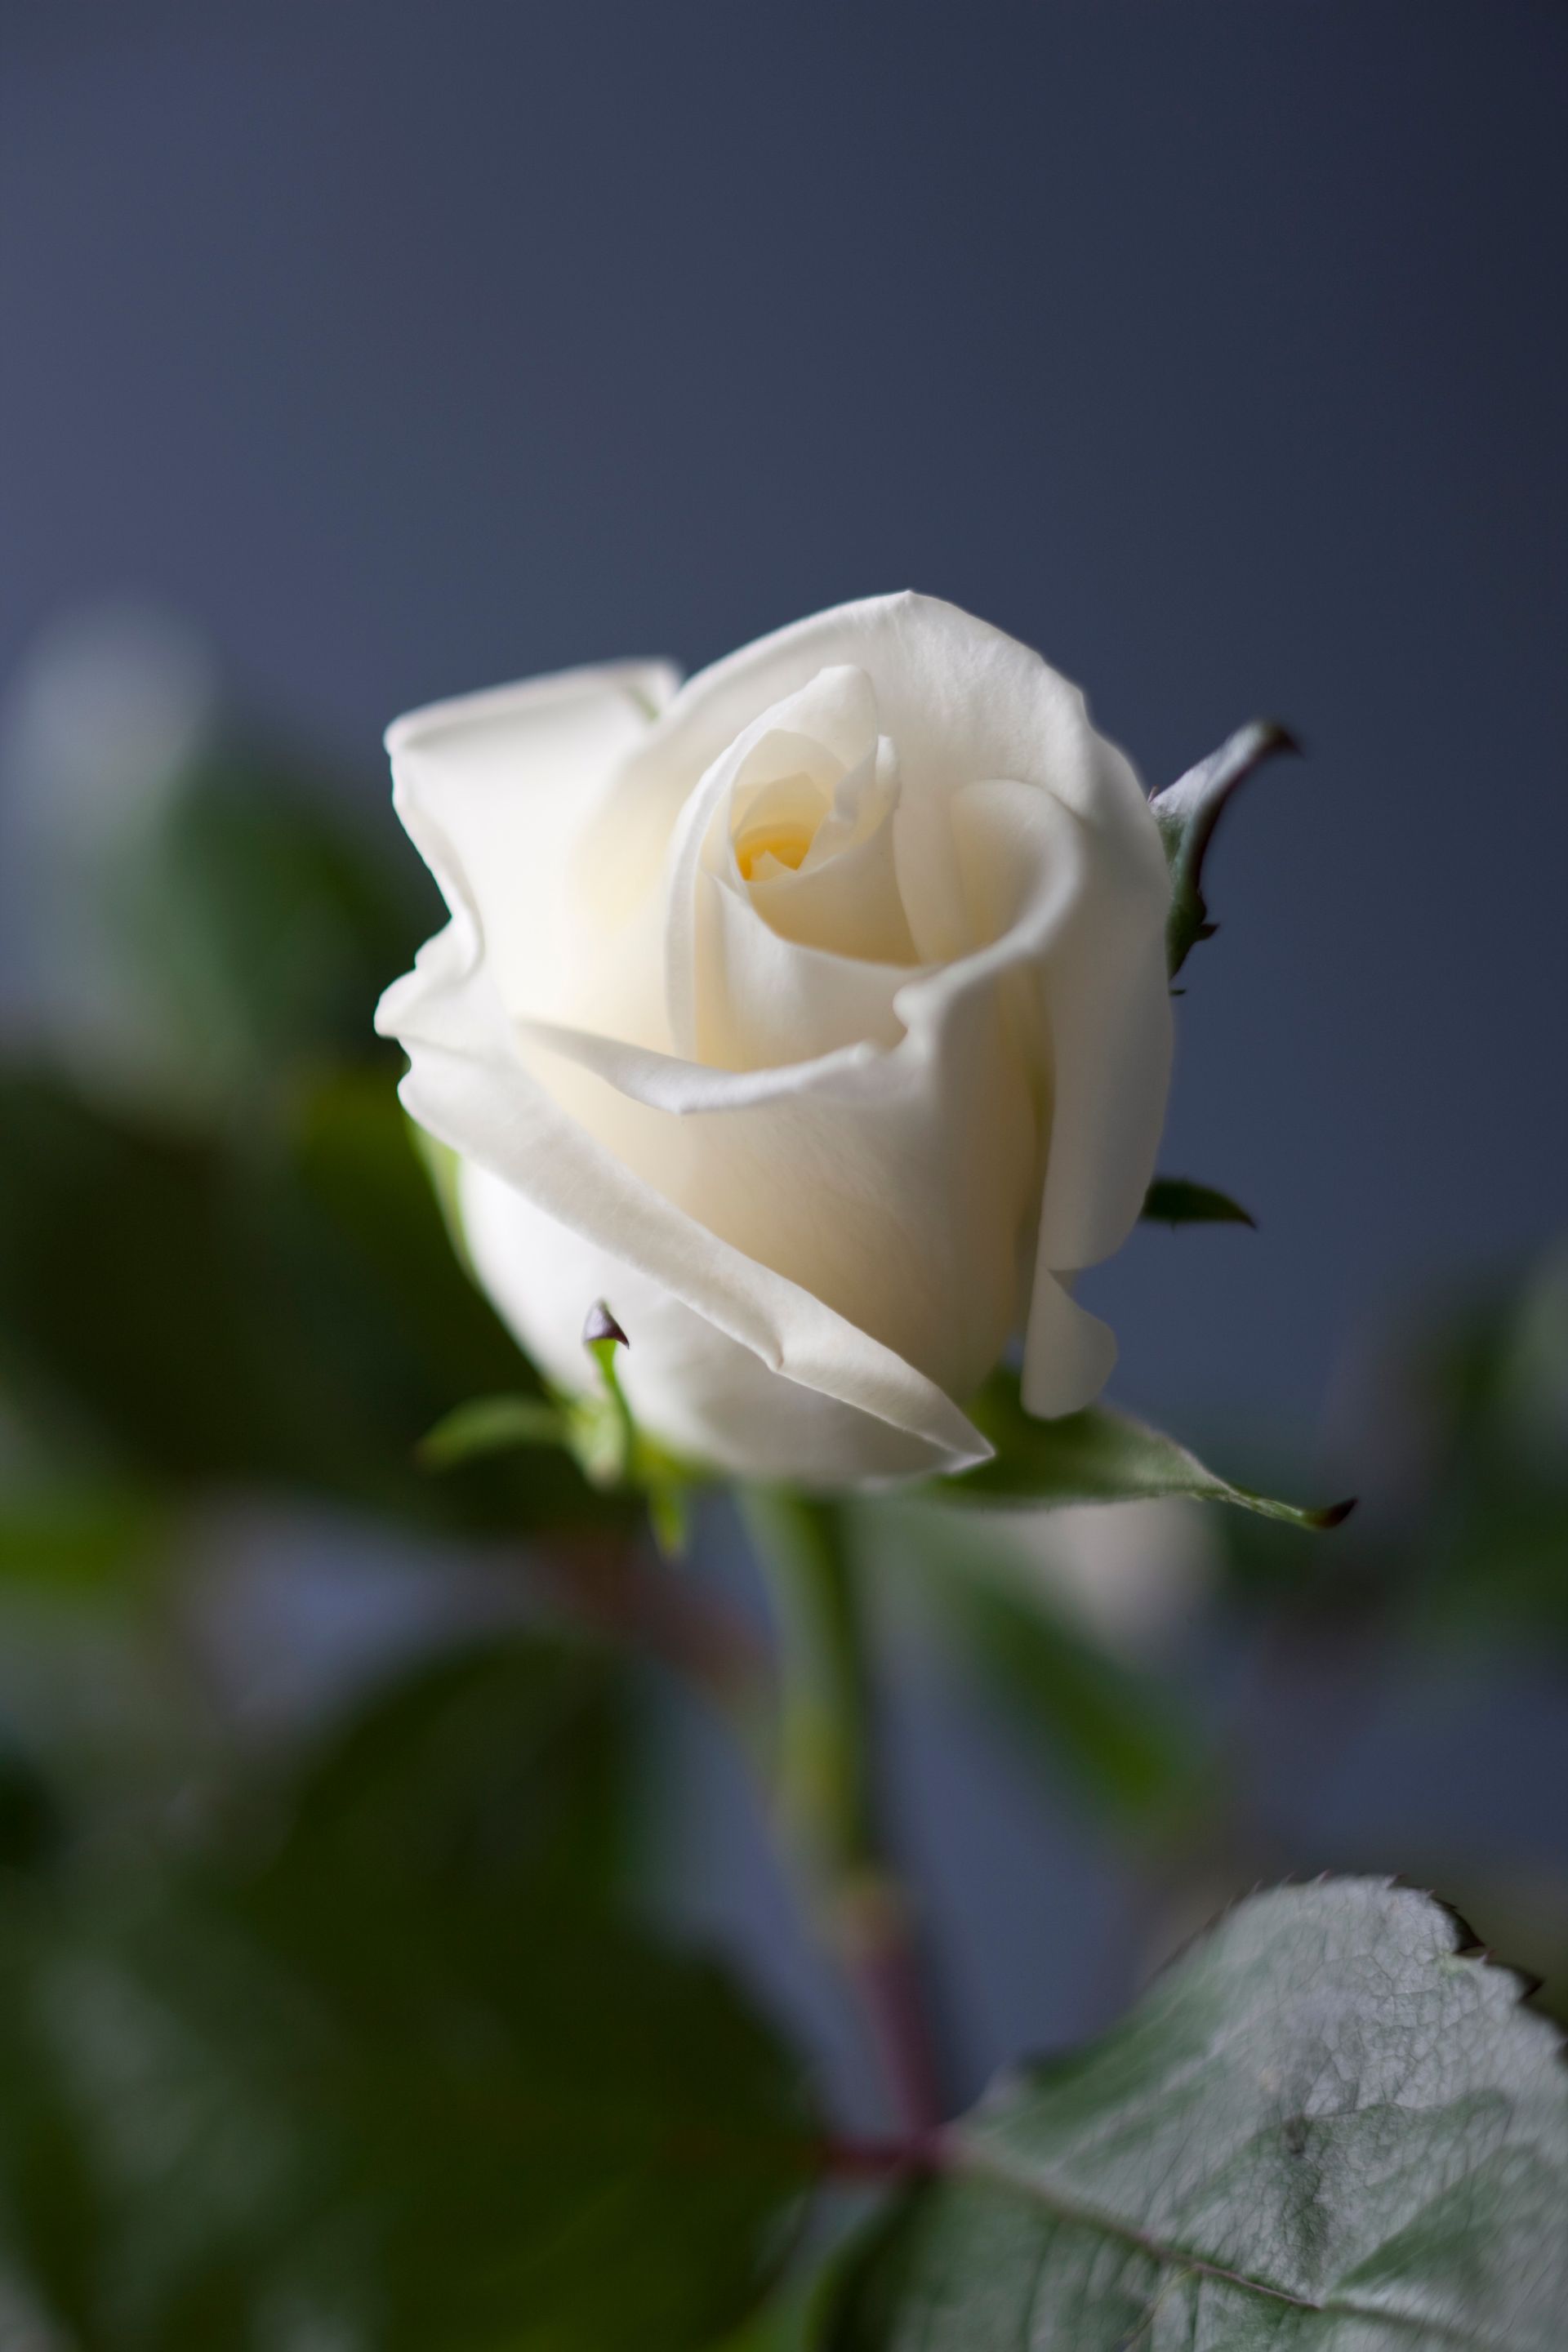 An image of a white rose.